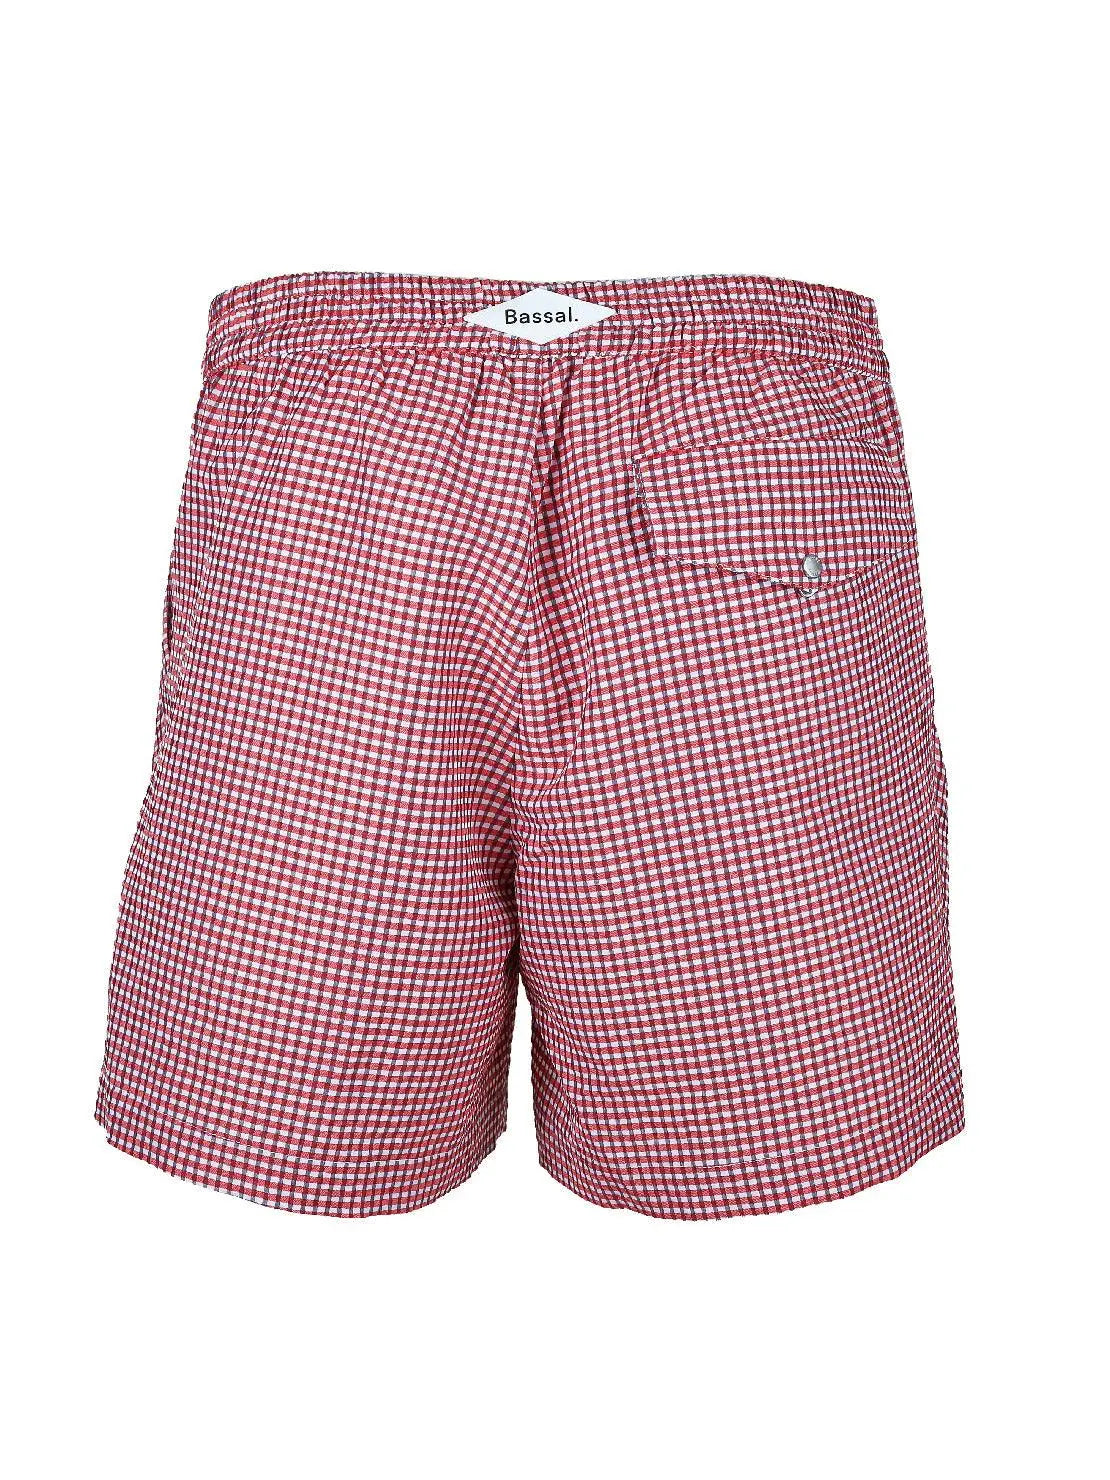 A pair of red and white gingham checkered Taia Red Swimwear with a high waist and pleats at the front, available exclusively at Bassalstore in Barcelona. These lightweight swimwear pieces feature two side pockets, making them ideal for casual summer wear.